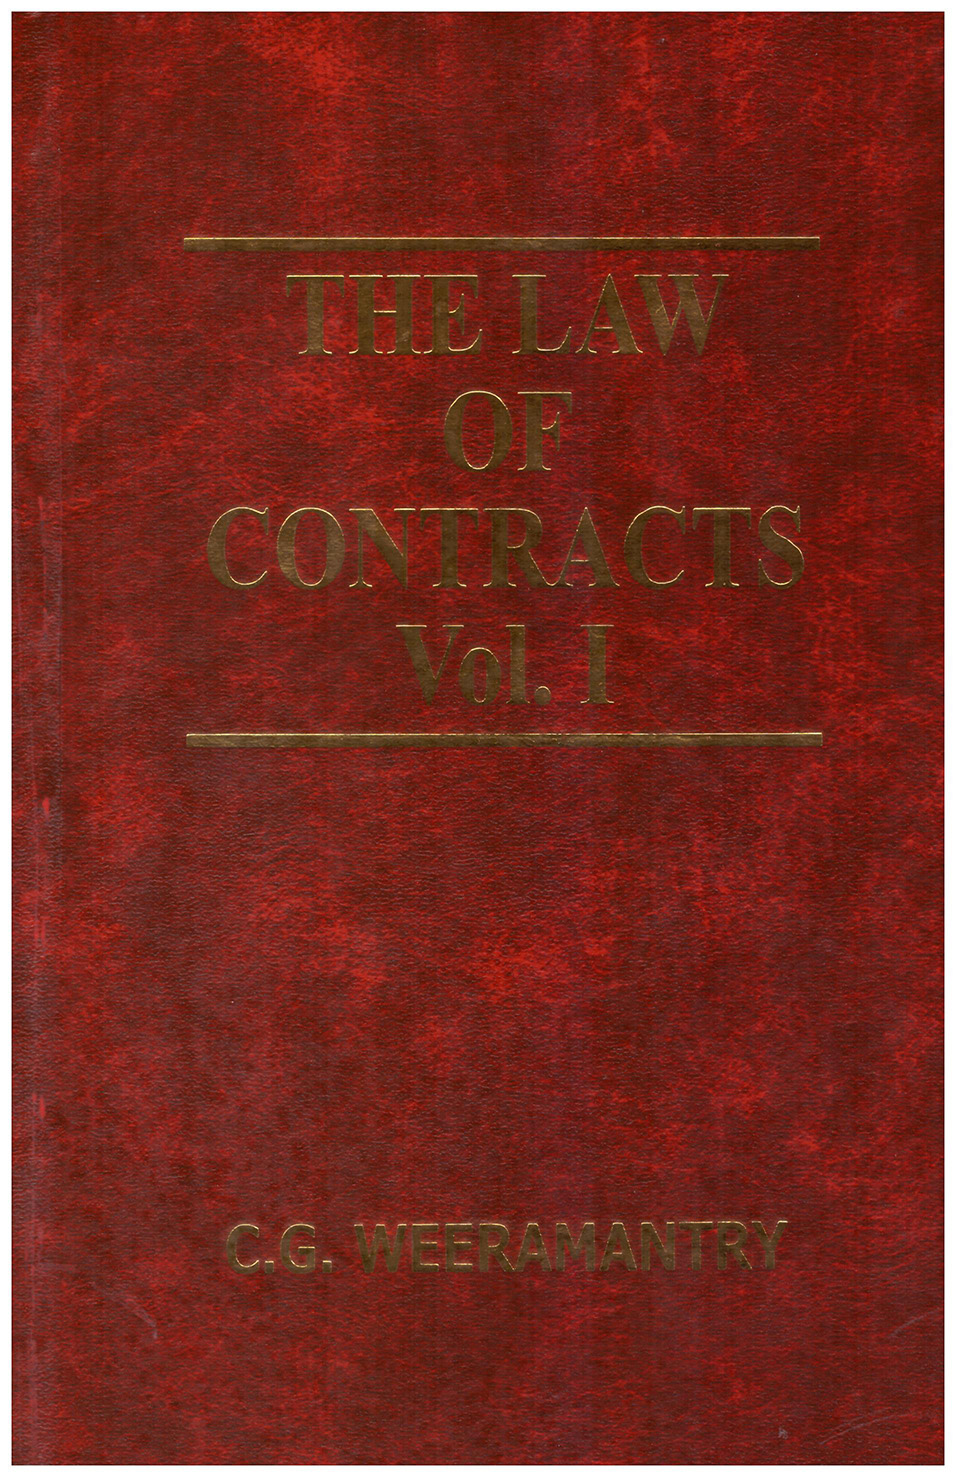 The Law of Contracts Vol. I and II